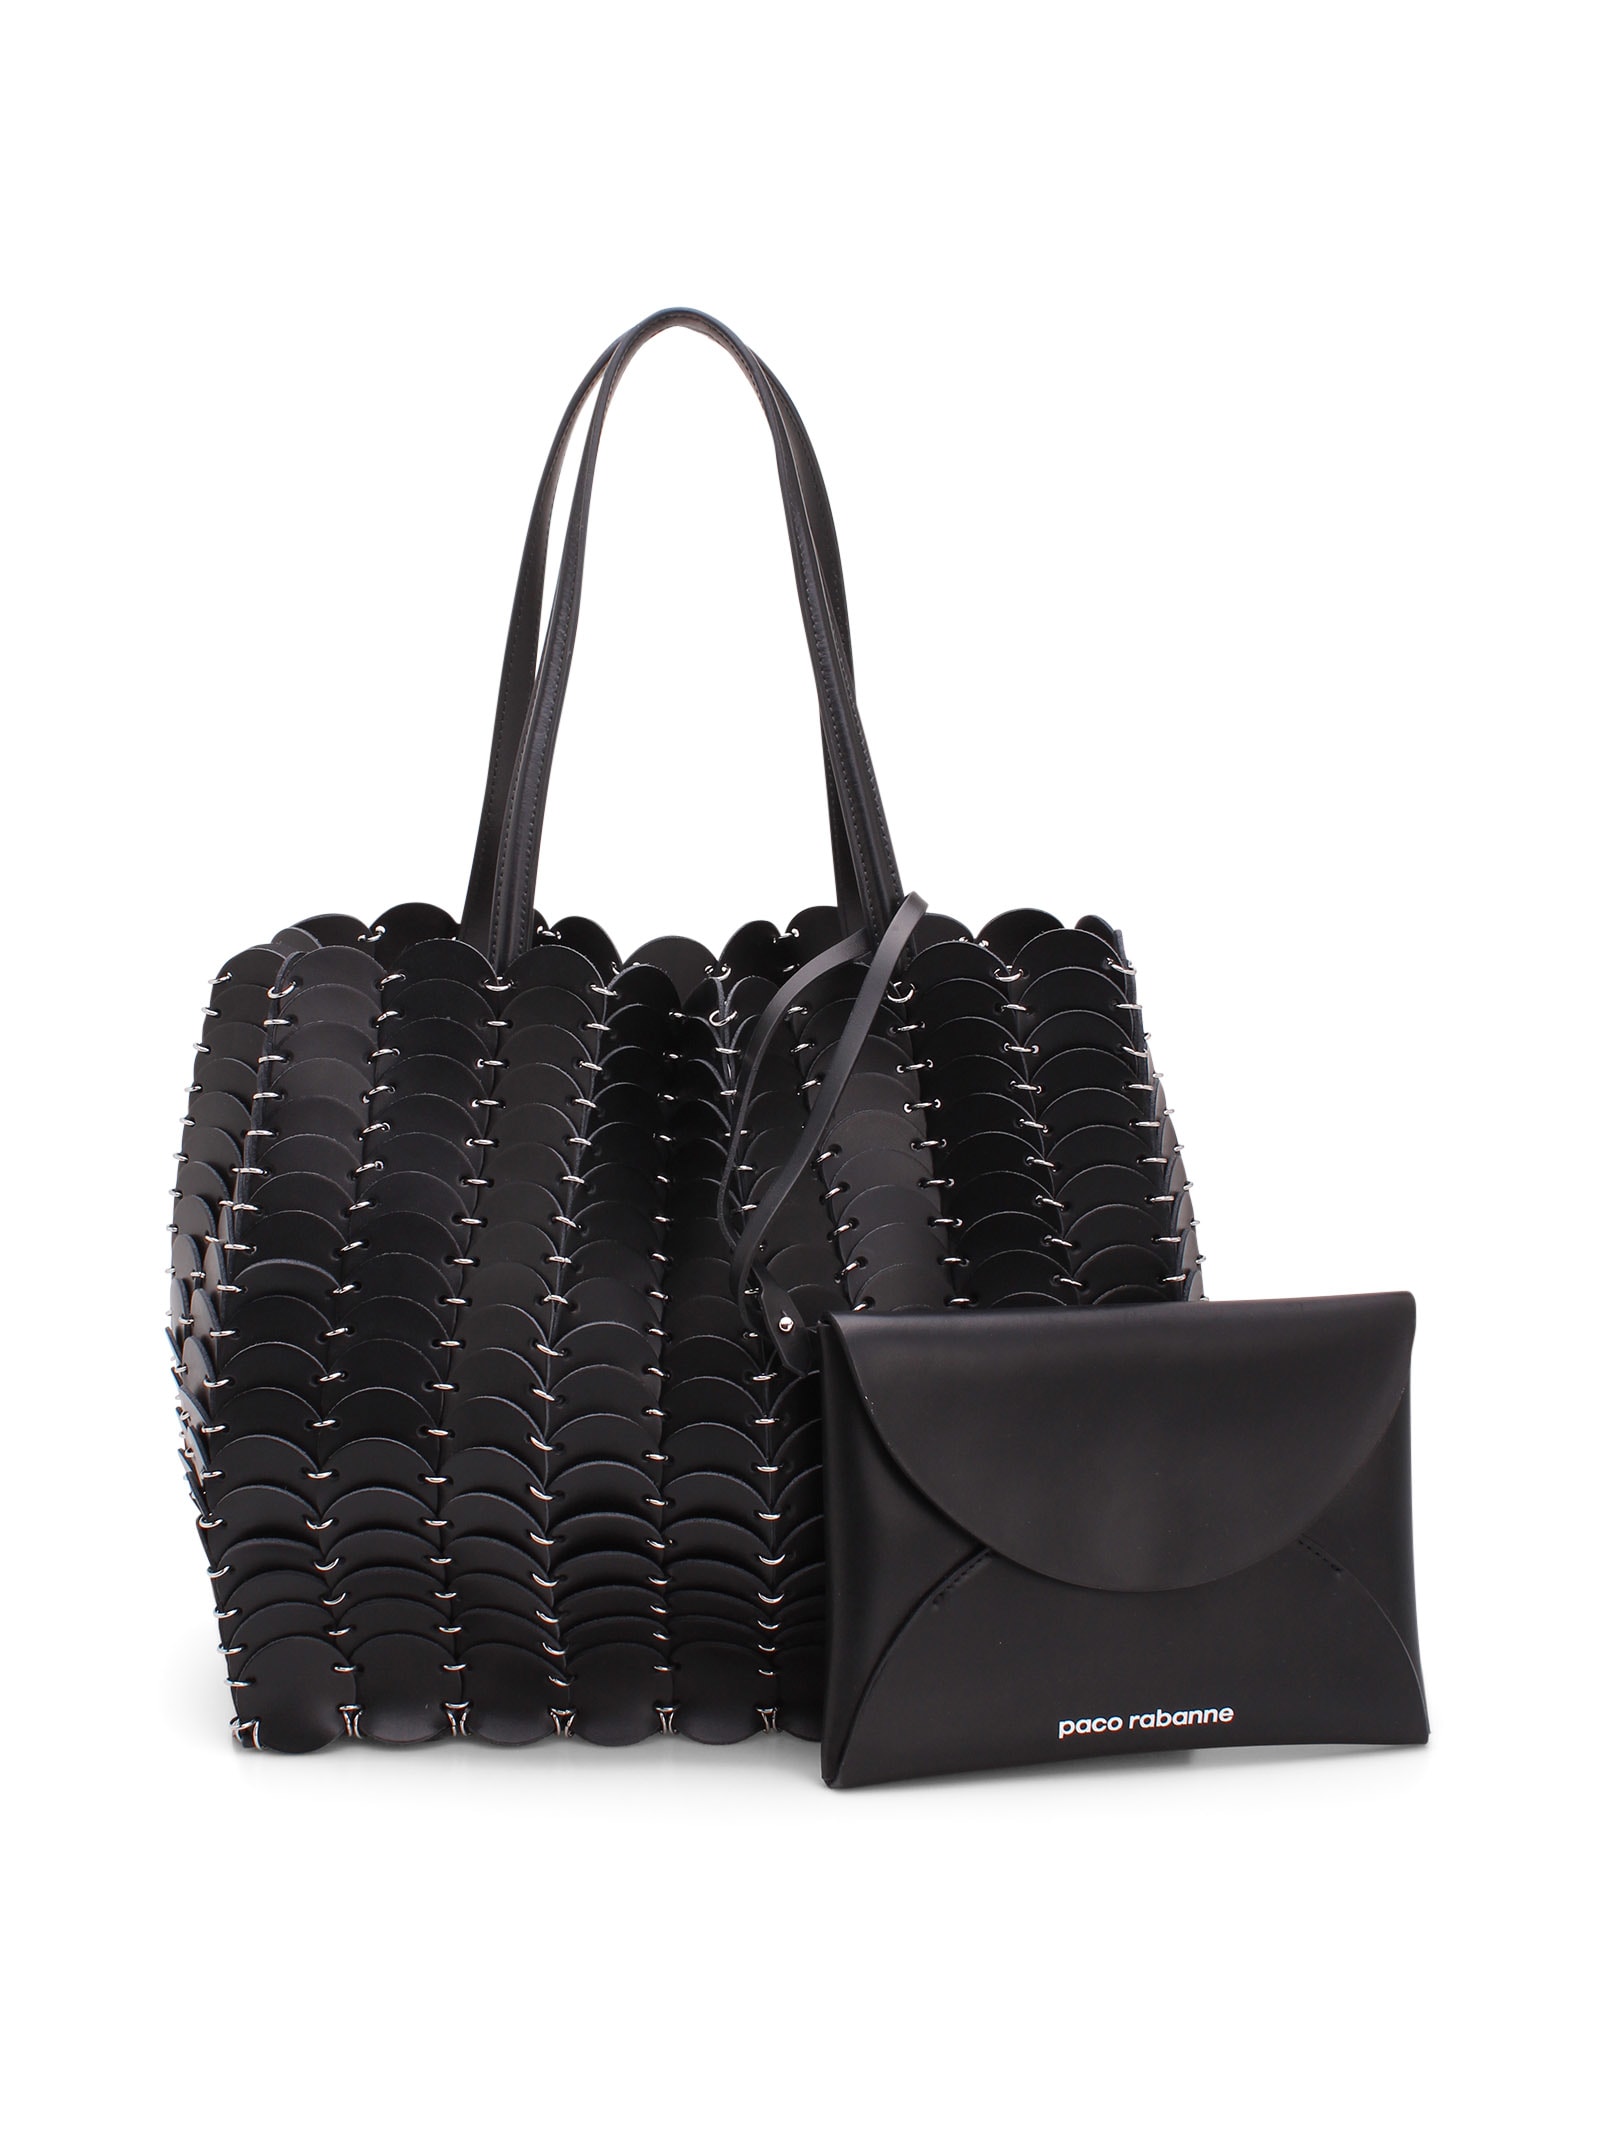 Paco Rabanne pacoio Leather Shopping Bag